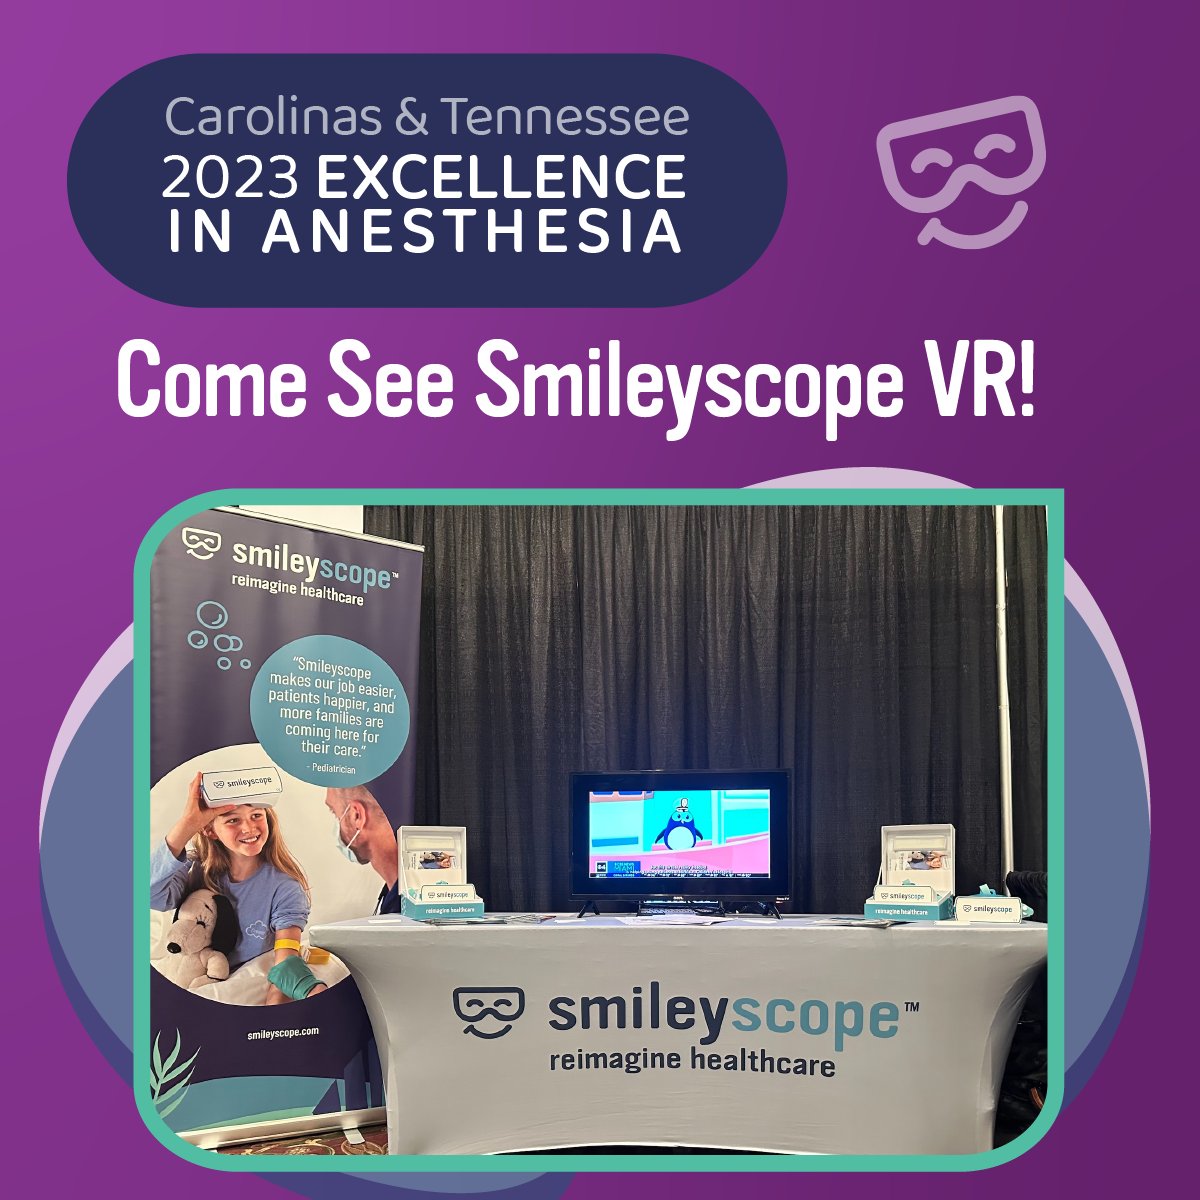 This weekend we're in Asheville, NC for the Carolinas & Tennessee Anesthesiology Conference (CTAC)! Did you know that Smileyscope VR can help administer, reduce, or altogether avoid sedation? Learn more at Smileyscope.com! #anesthesia #virtualreality #smileyscope